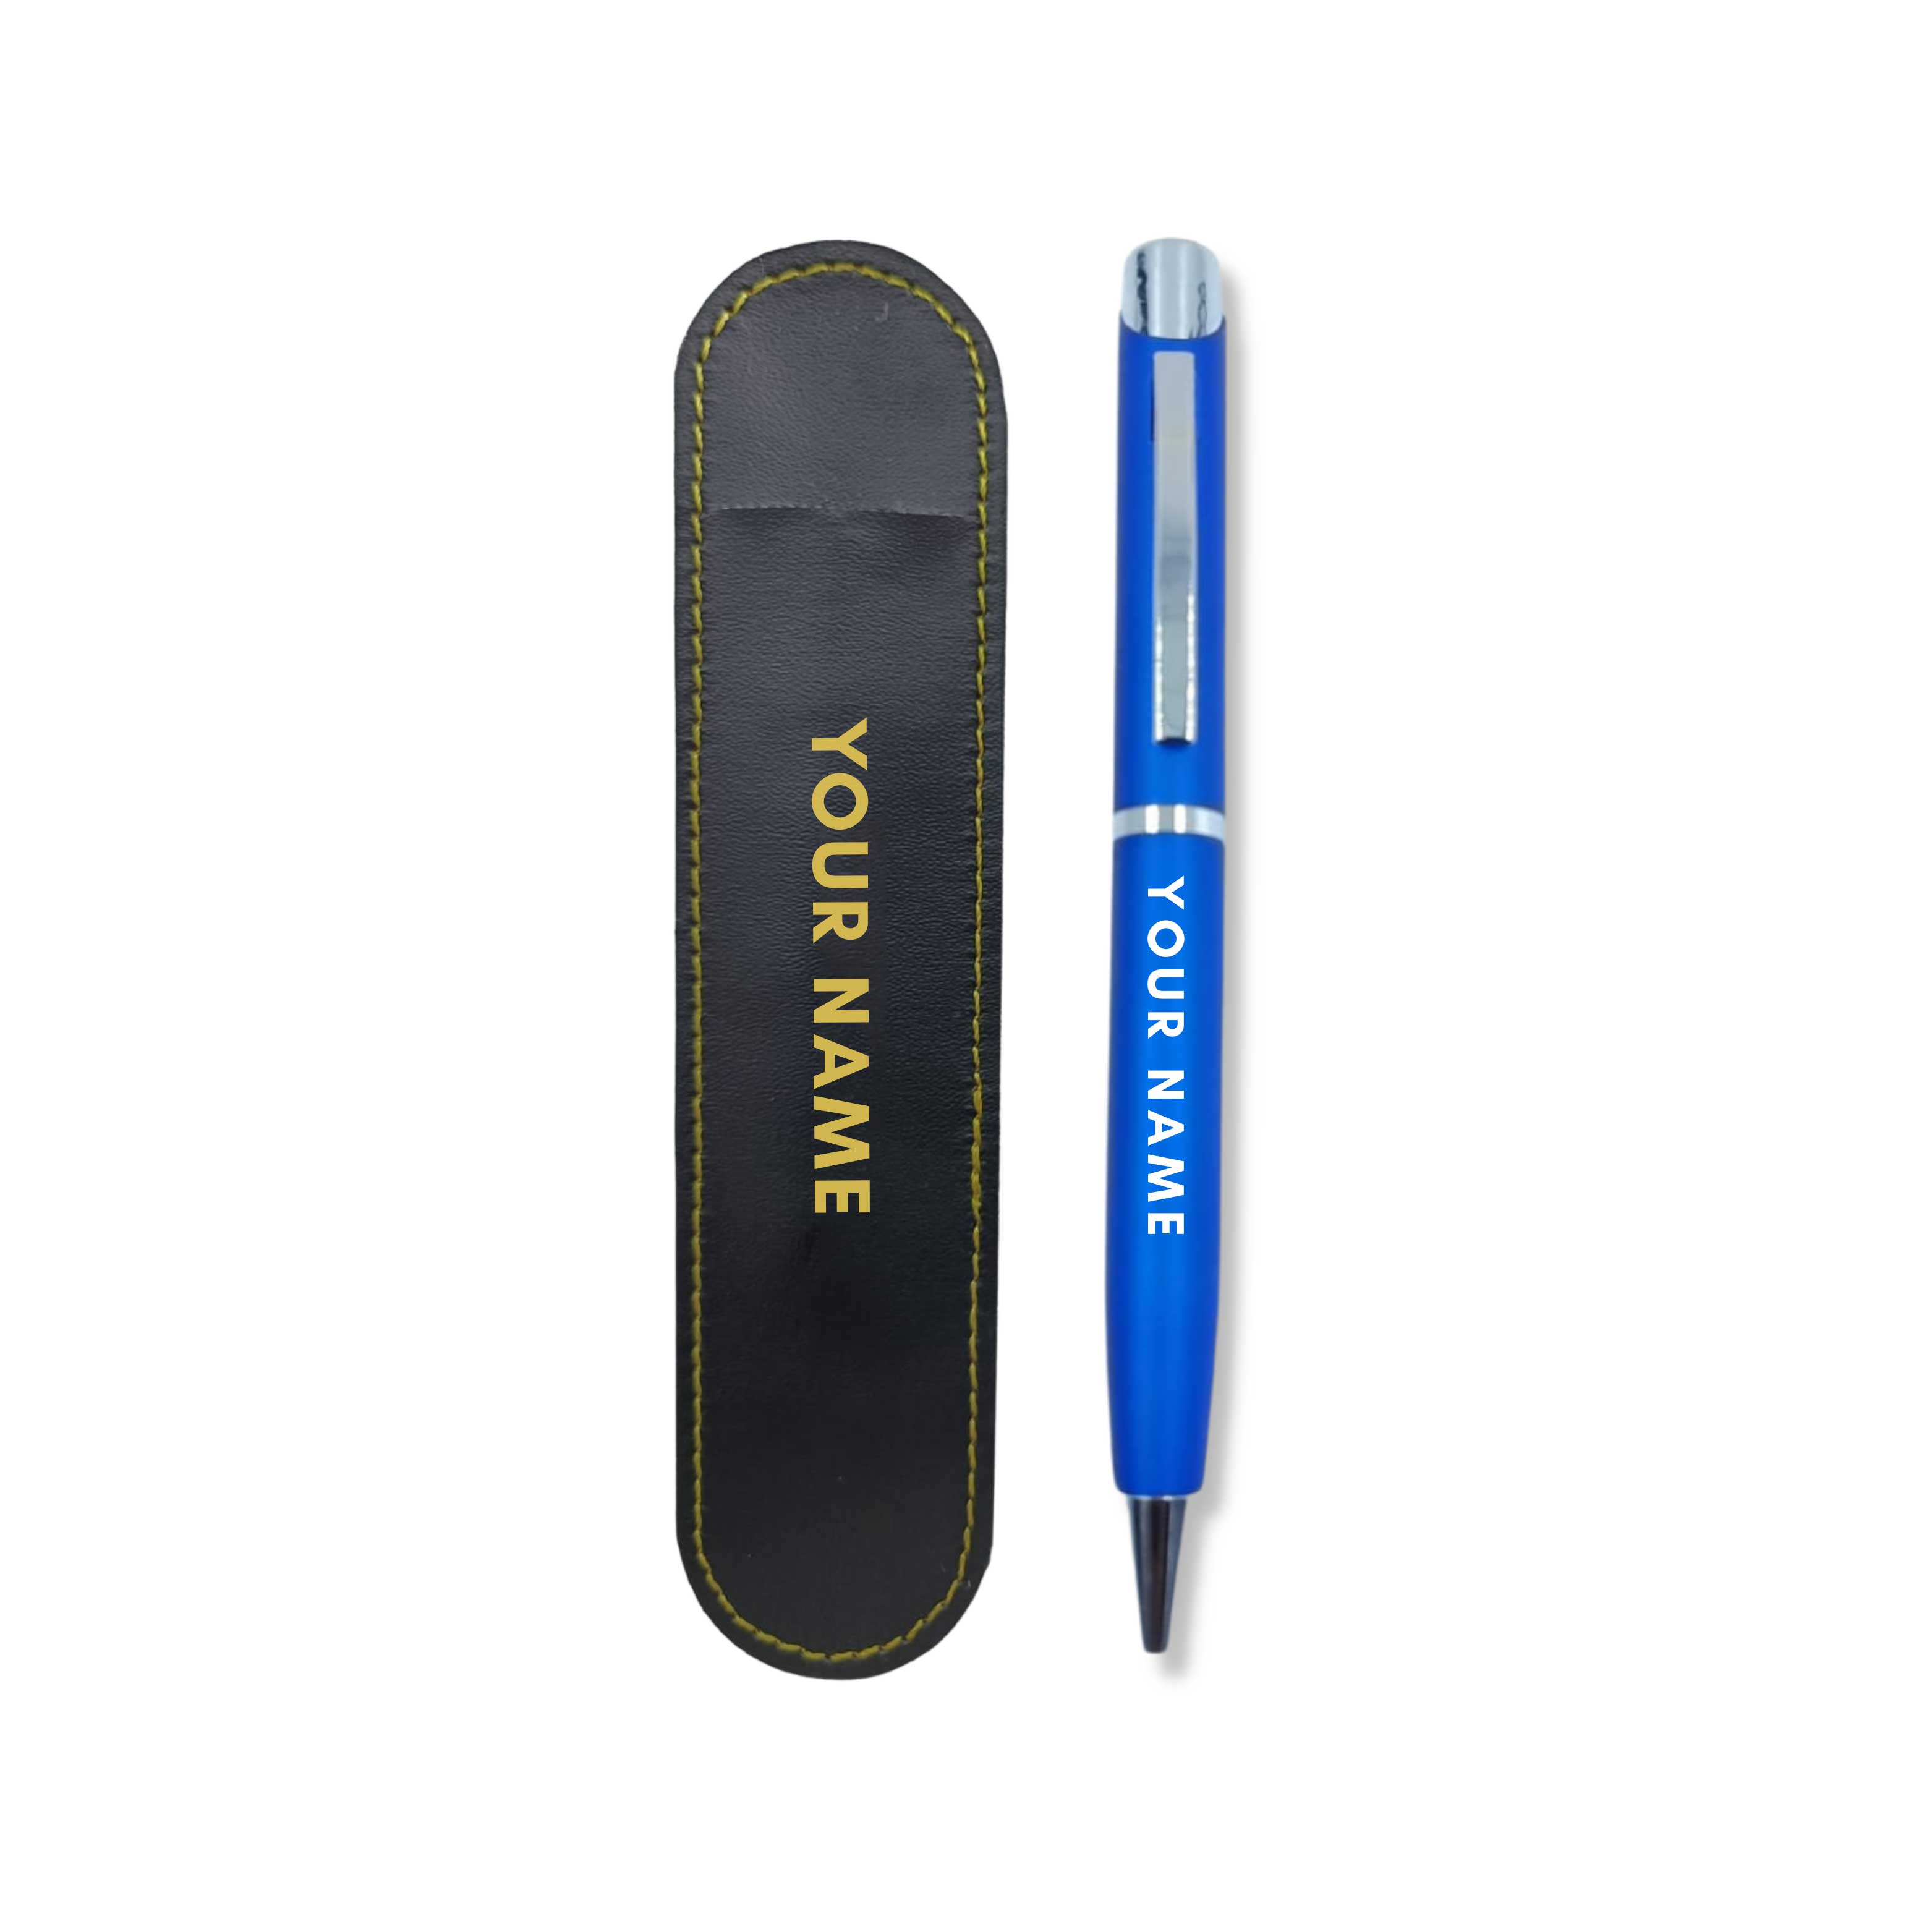 Buy MOXTER Personalized Metal Pen With Name Engraved Pen, Best for Gift,  Name Printed Pen, Ball pen name printed for gift (Pack of 1 Pen) Online at  Lowest Price Ever in India |